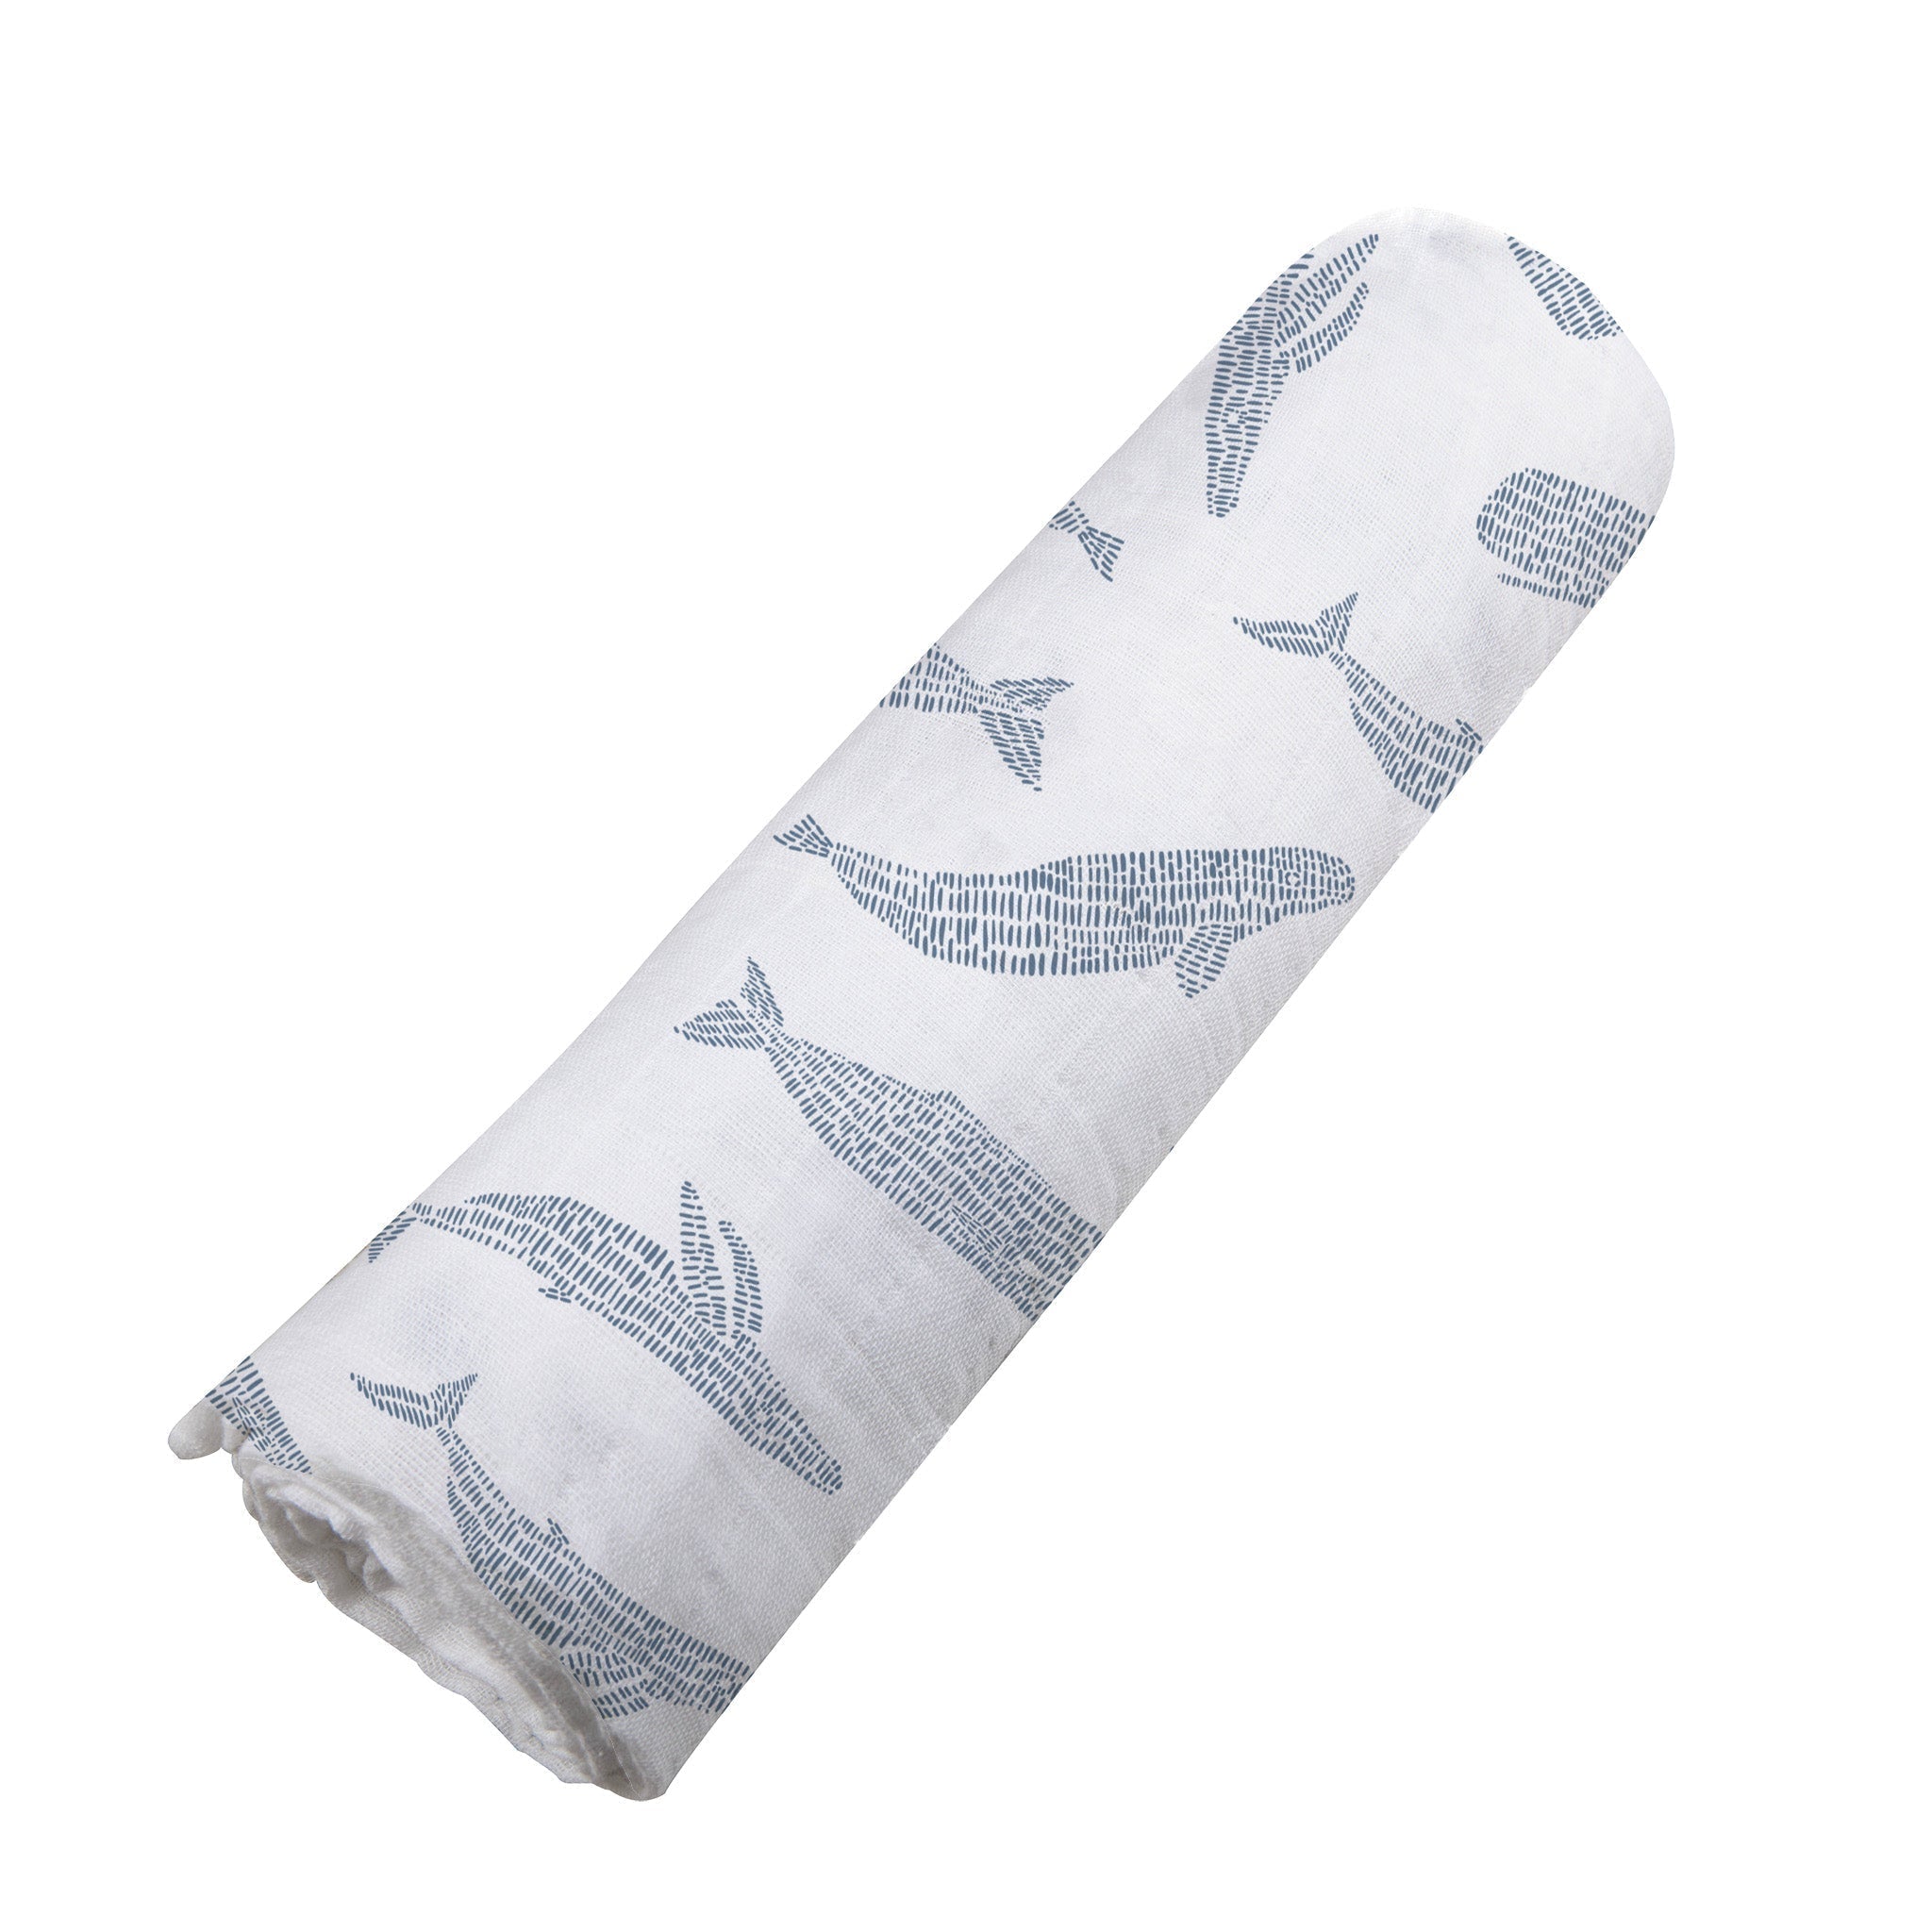 Baby swaddle with whales made from bamboo